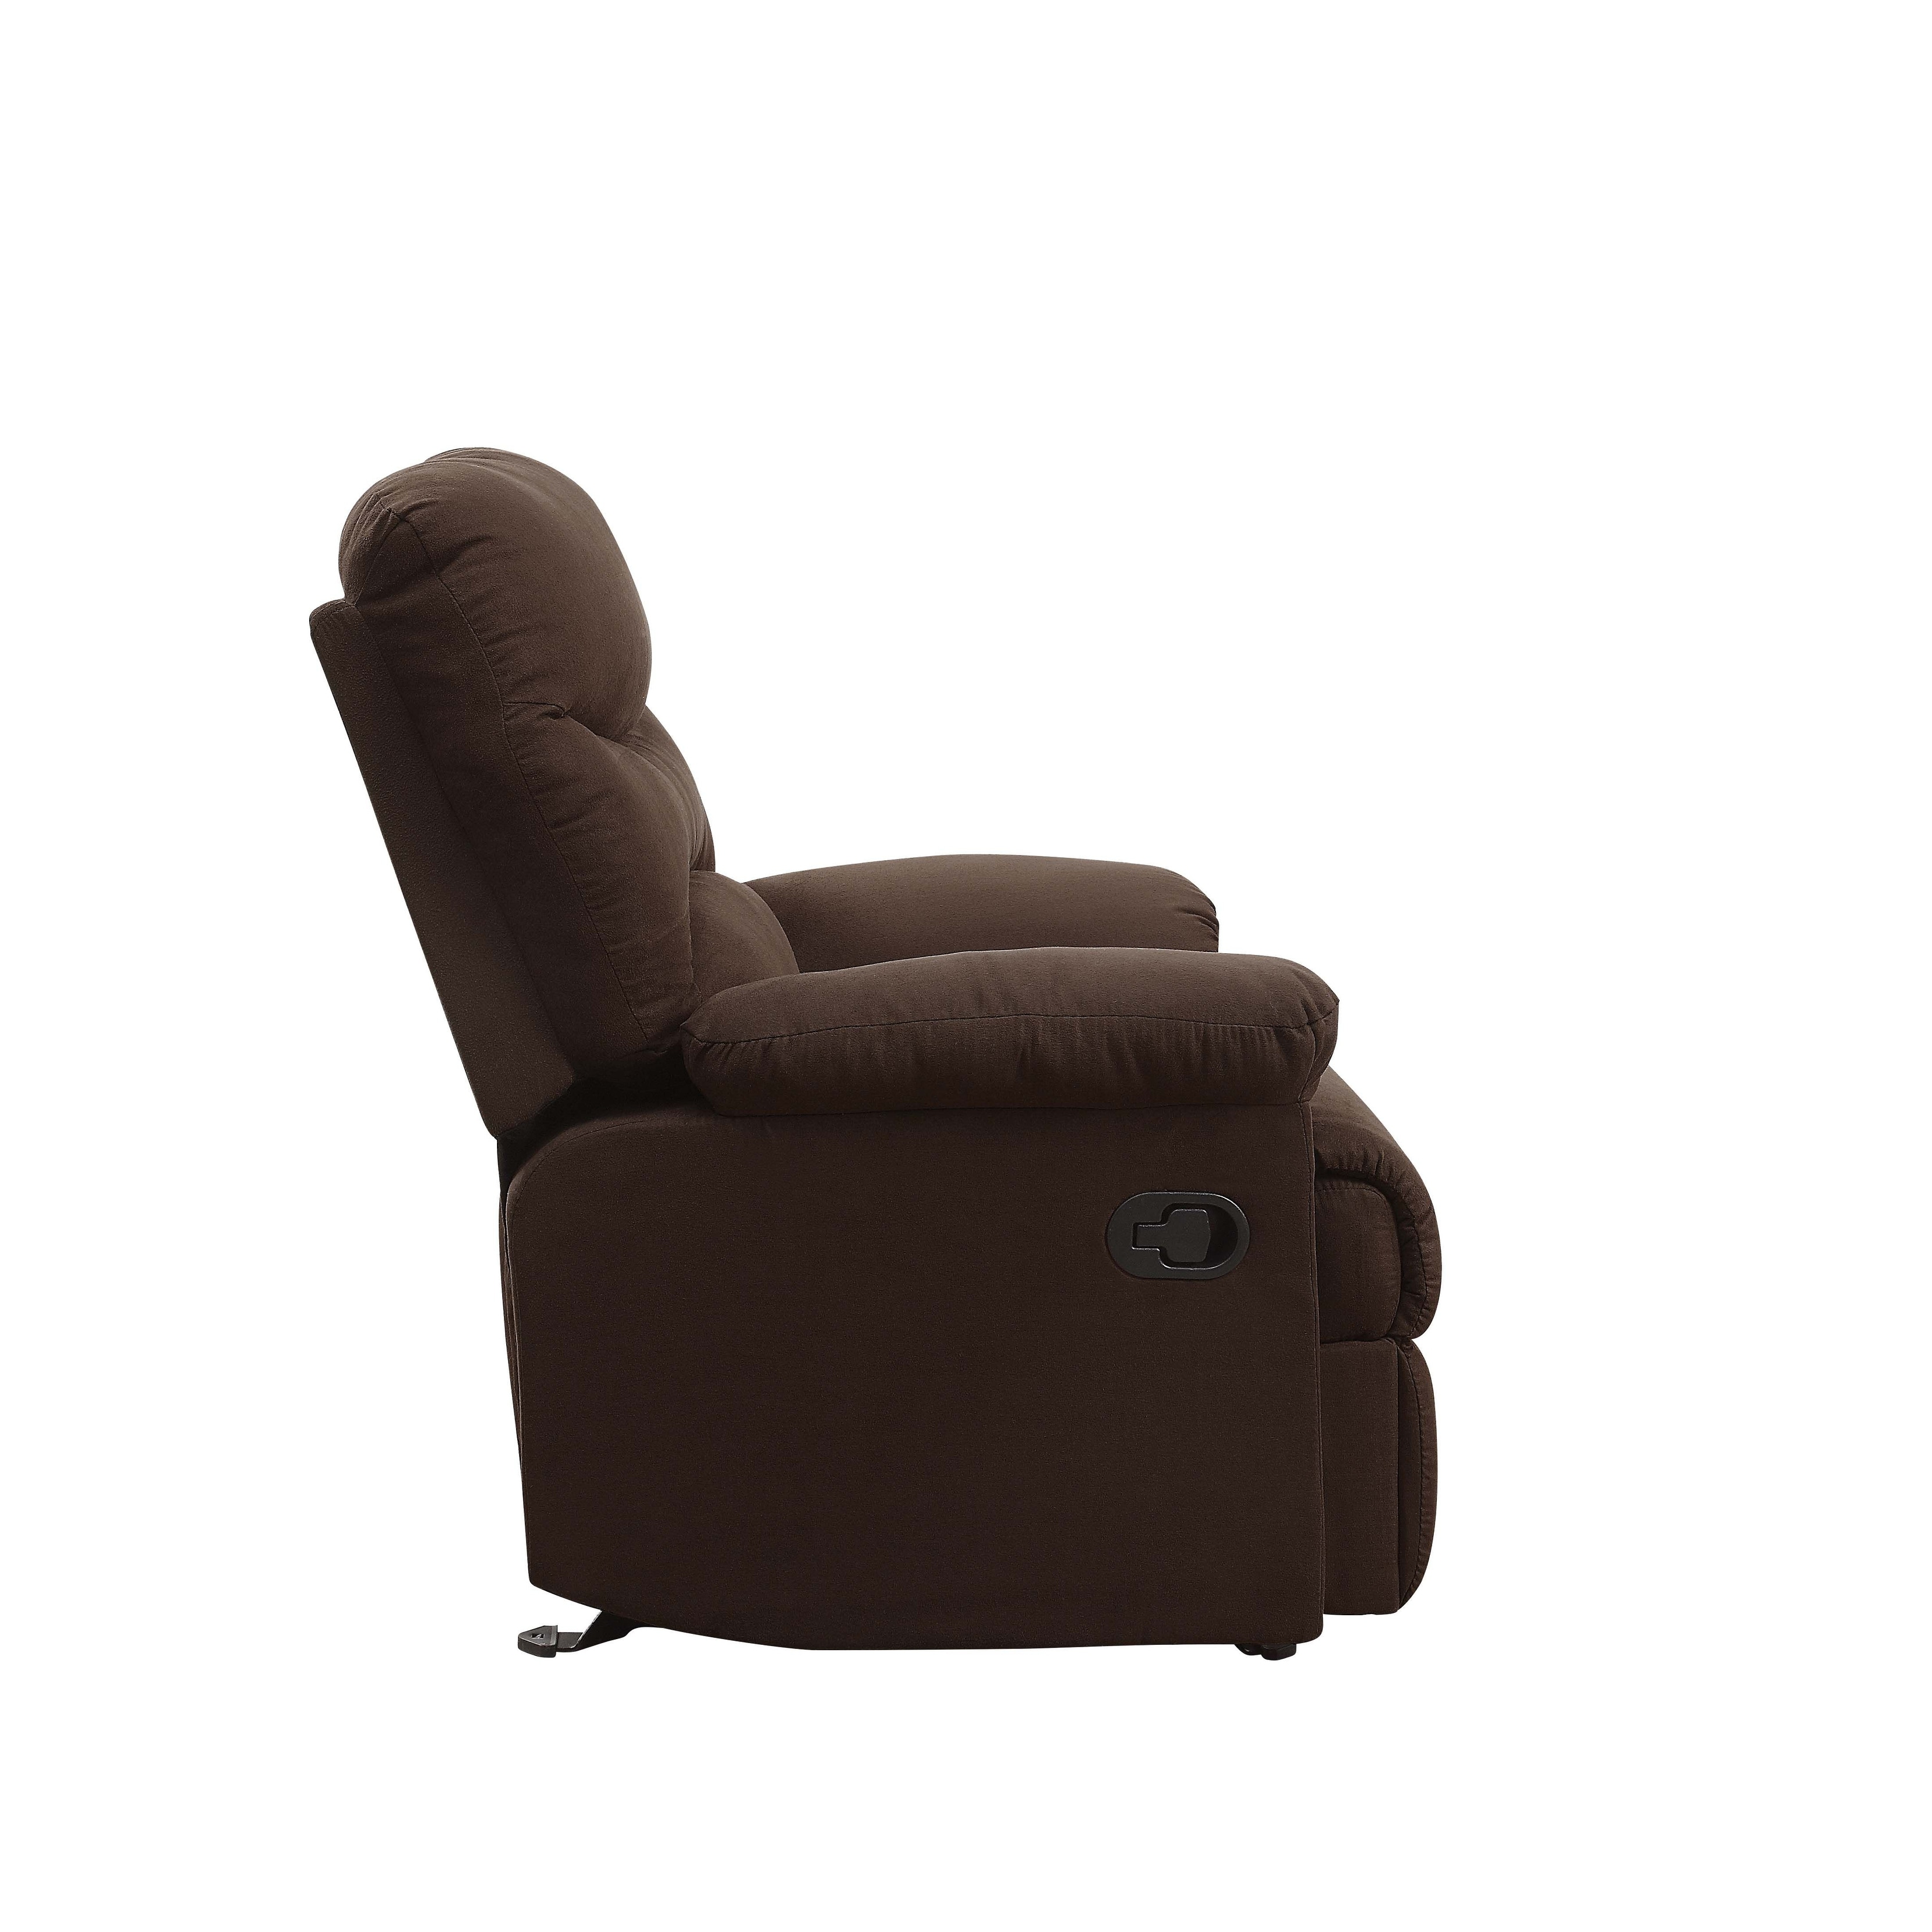 https://ak1.ostkcdn.com/images/products/is/images/direct/8200409c0c43308304dce3c869ffa2d5dfd4769e/Adjustable-Recliner-Chair-with-Hardwood-Frame-%26-Footrest-Extension%2C-Cushioned-Single-Sofa-for-Livingroom.jpg